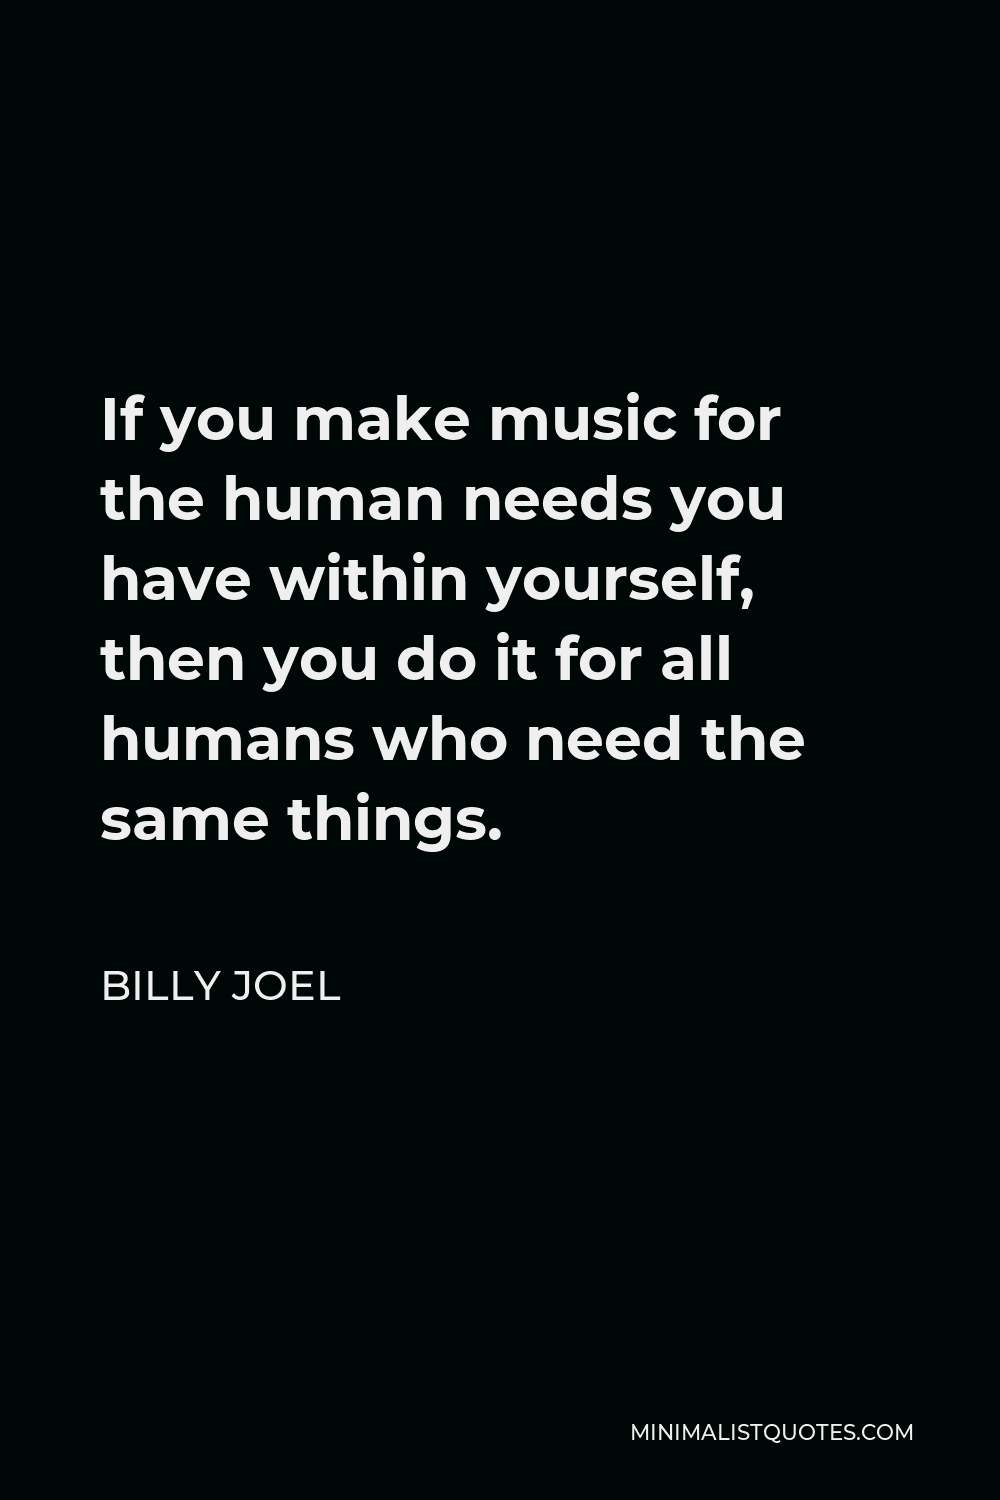 Billy Joel Quote - If you make music for the human needs you have within yourself, then you do it for all humans who need the same things.